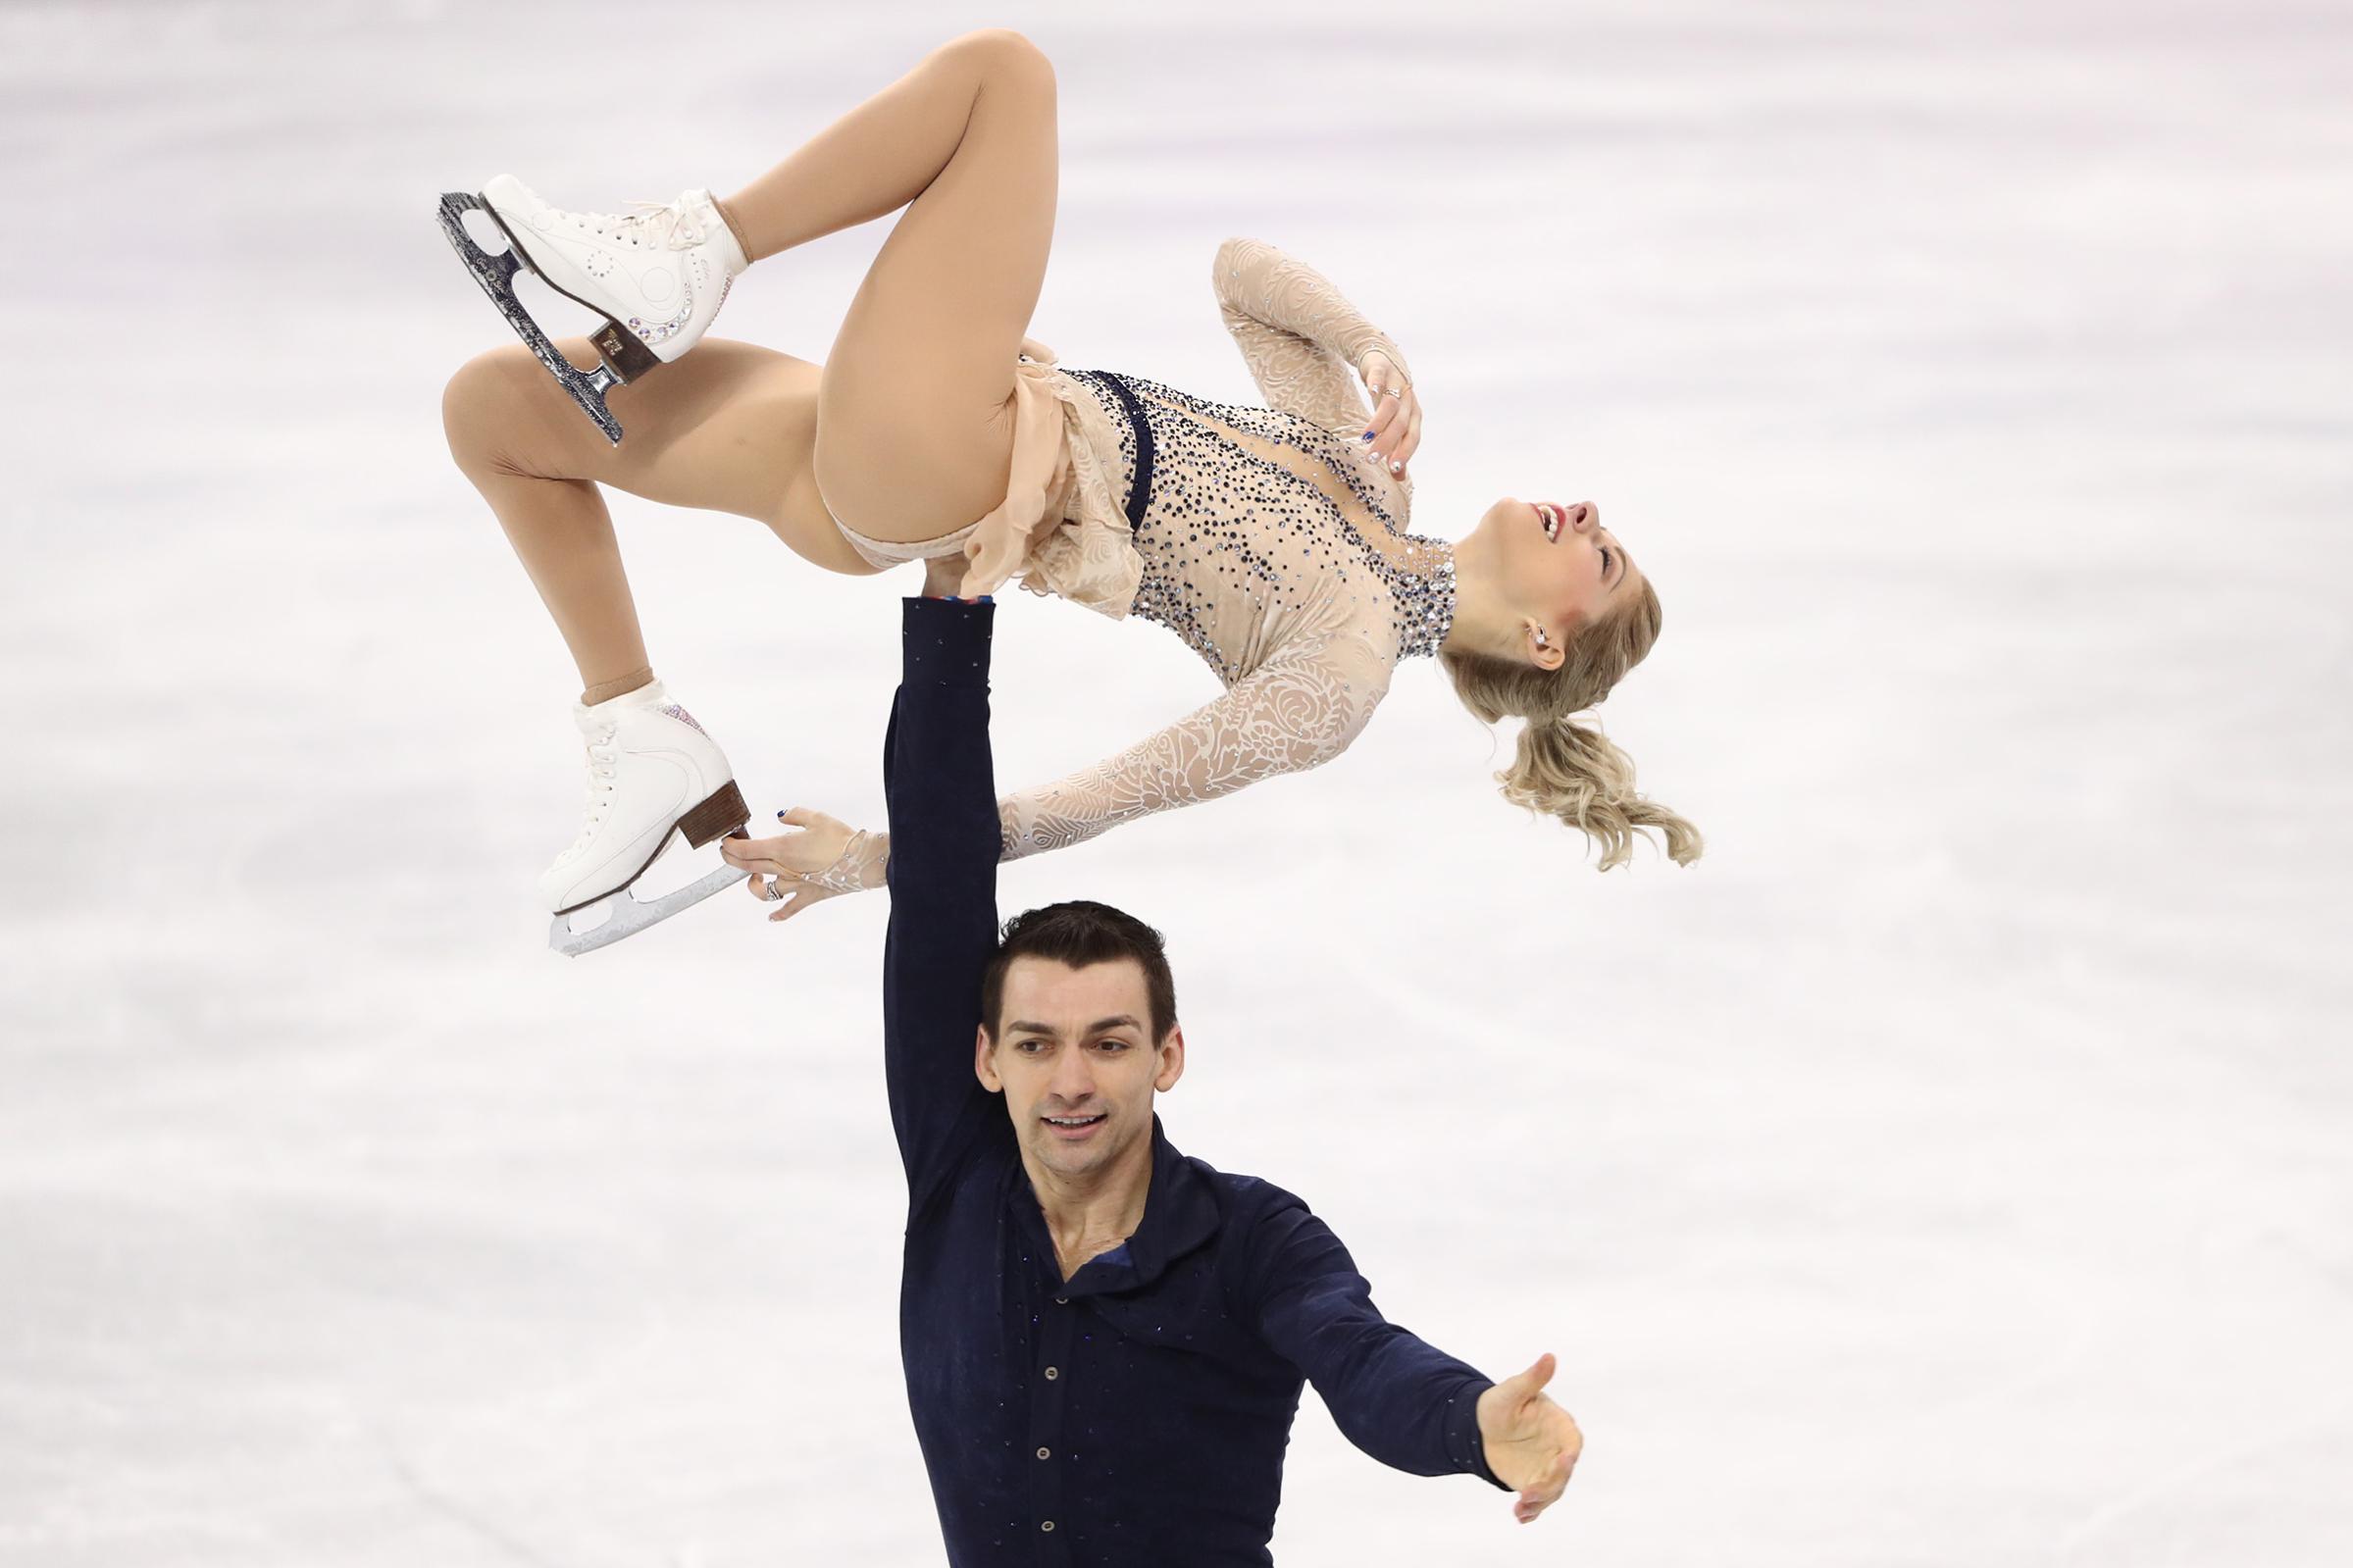 Pair skaters Alexa Scimeca Knierim and Chris Knierim of the USA perform their short program during a figure skating event at the 2018 Winter Olympic Games at Gangneung Ice Arena